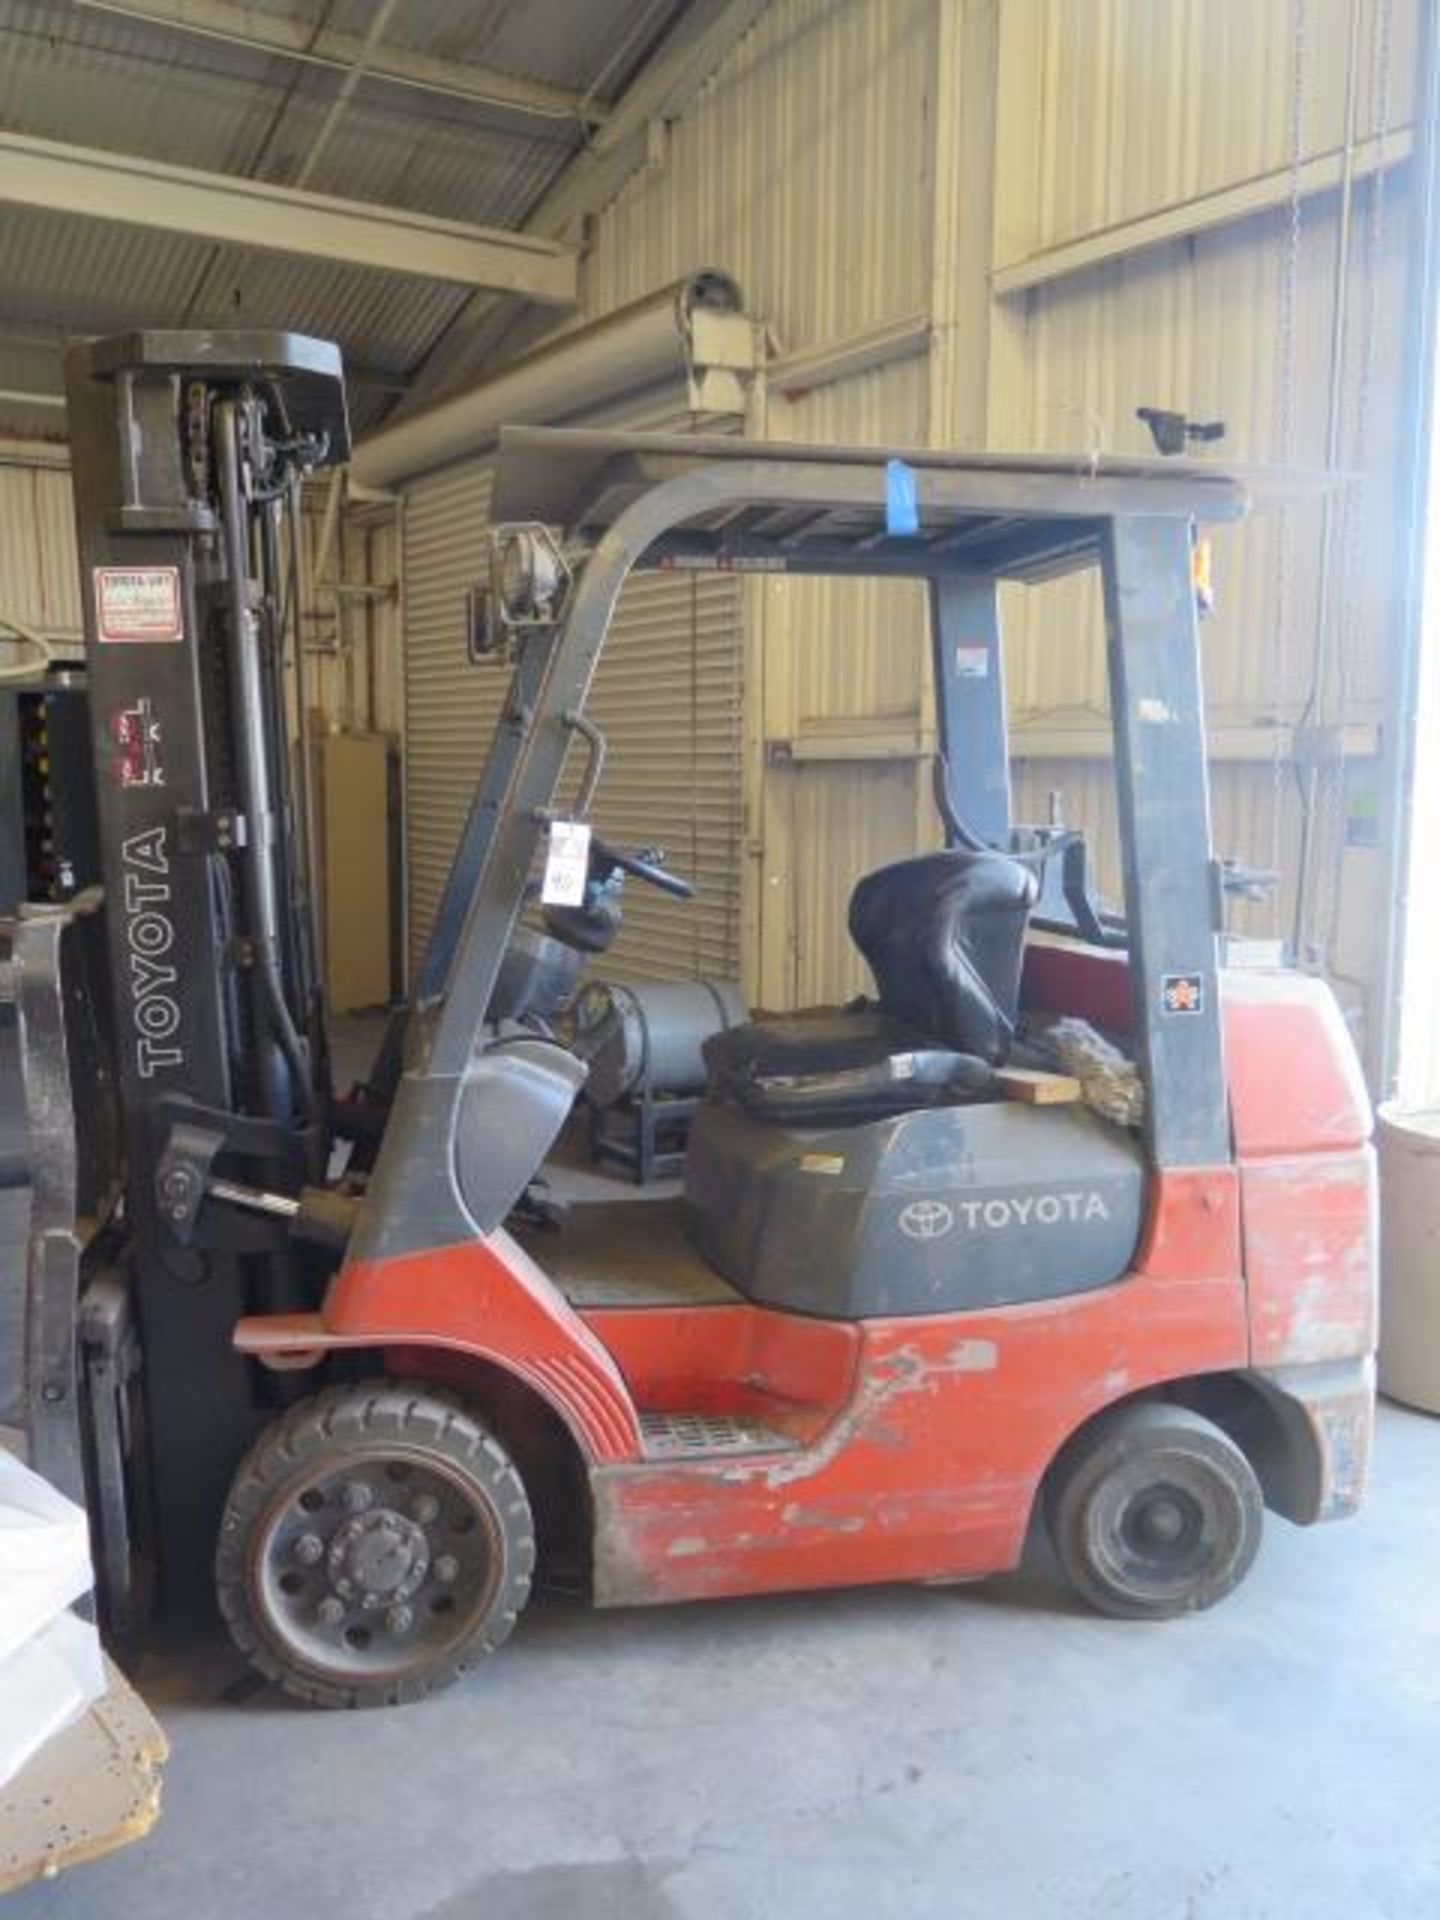 Toyota 7FGCU30 4750 Lb Cap LPG Forklift s/n 60080 w/ 3-Stage Mast, 188” Lift, Side Shift, SOLD AS IS